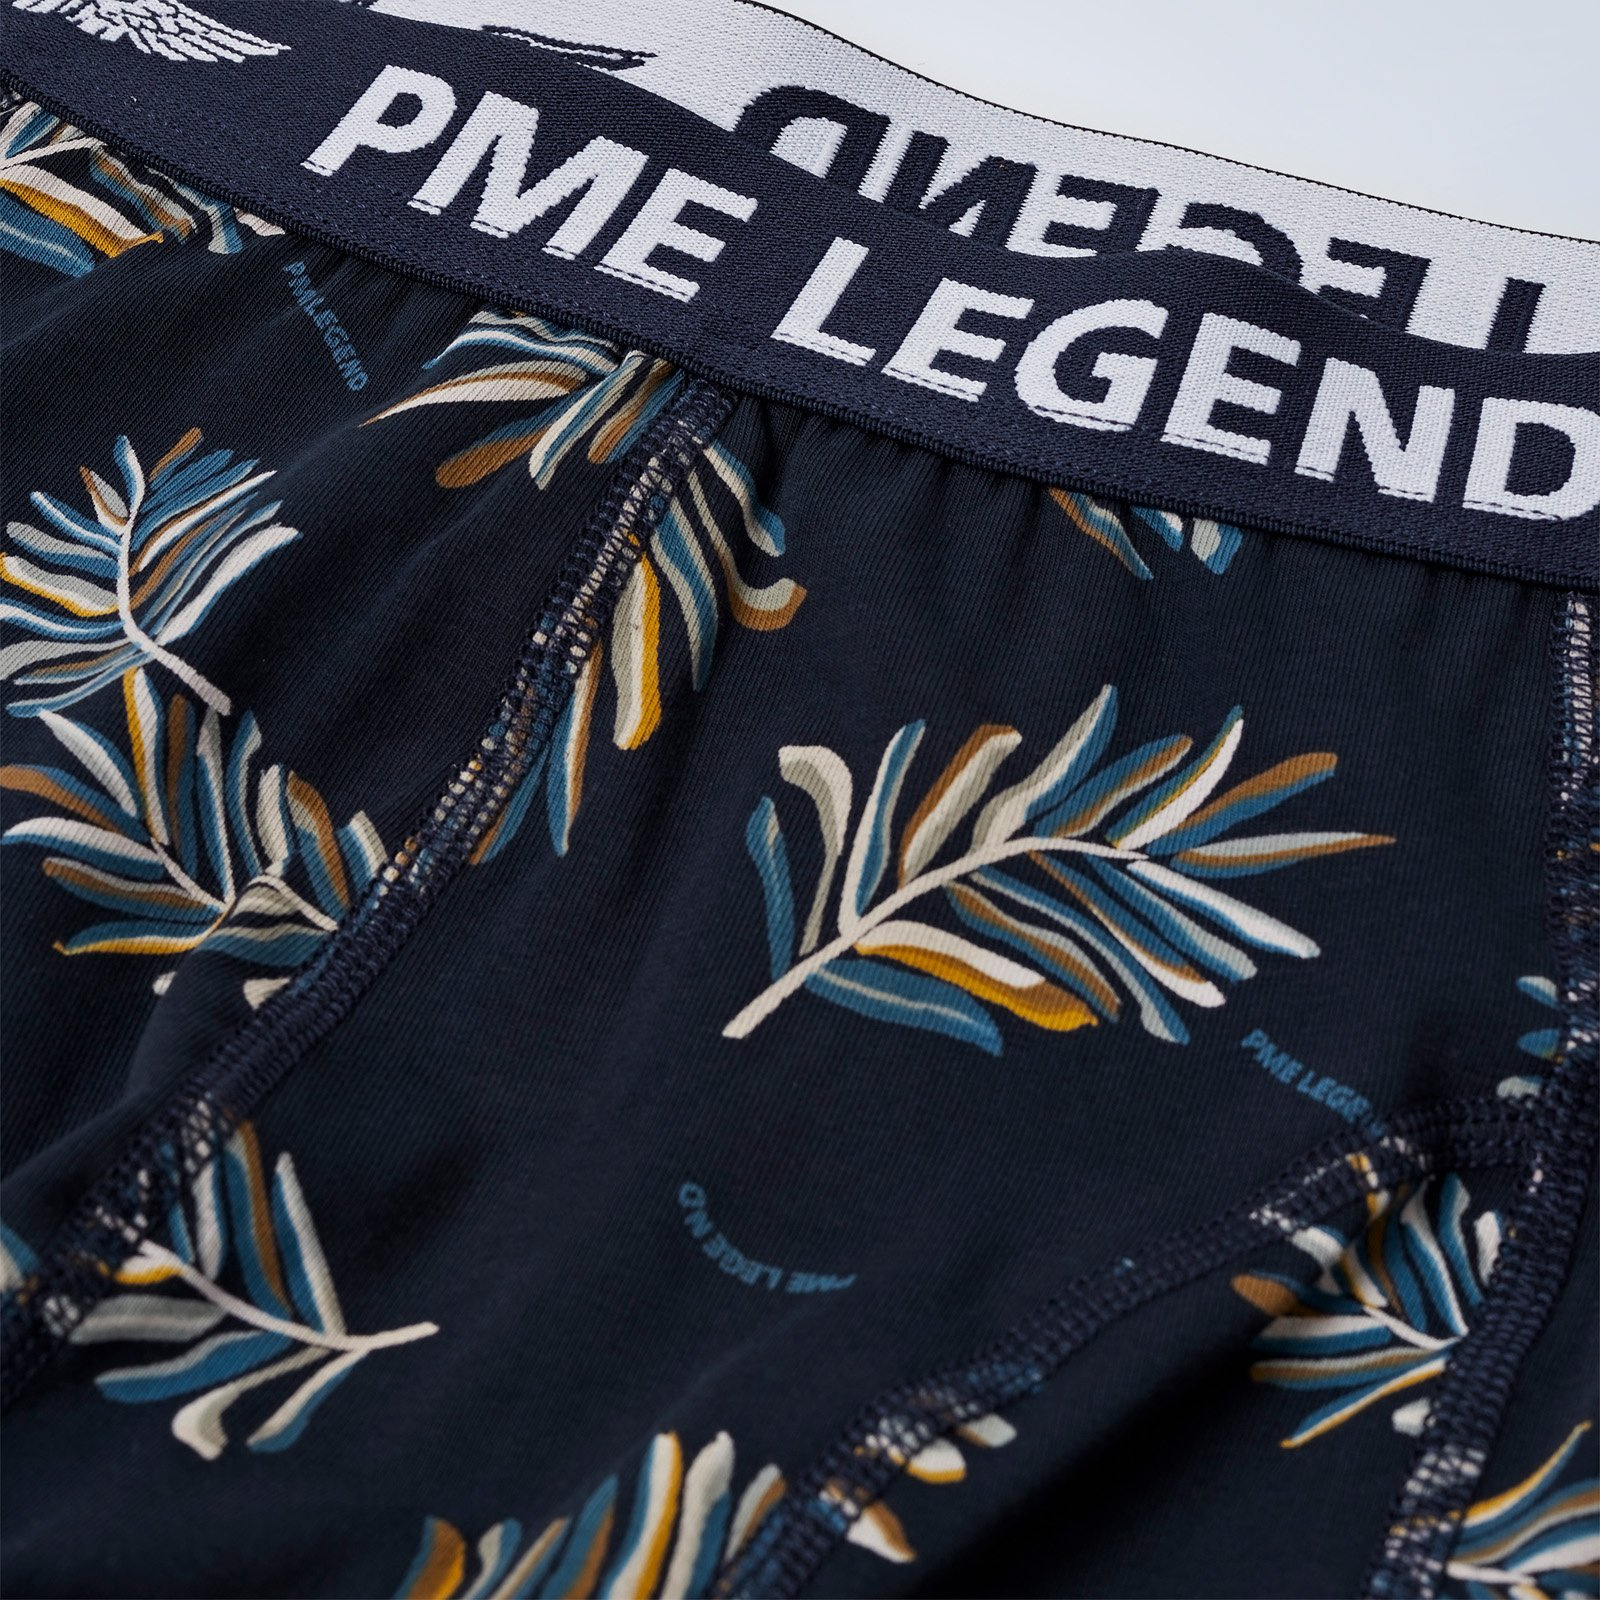 PME Legend Boxershorts PUW2302900 - 5281 Salute - Greenfield Fashion